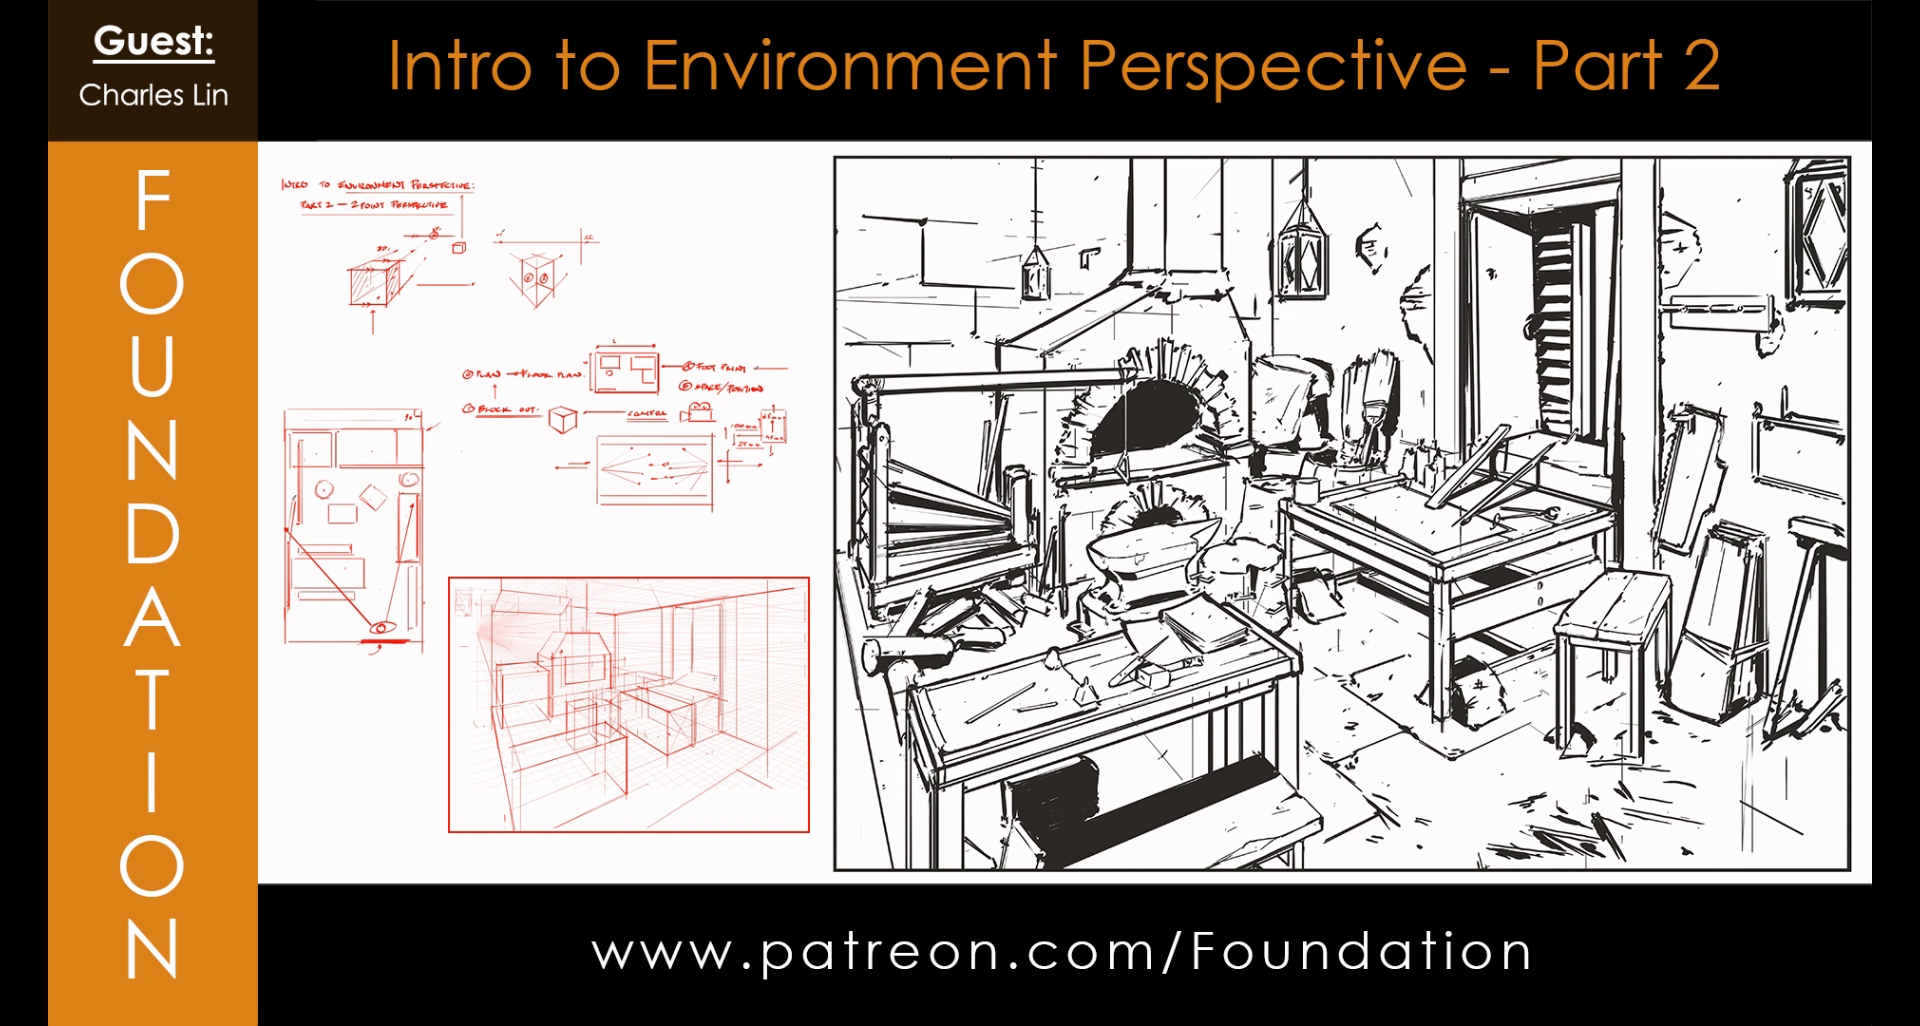 Intro to Environment Perspective Part 2 with Charles Lin